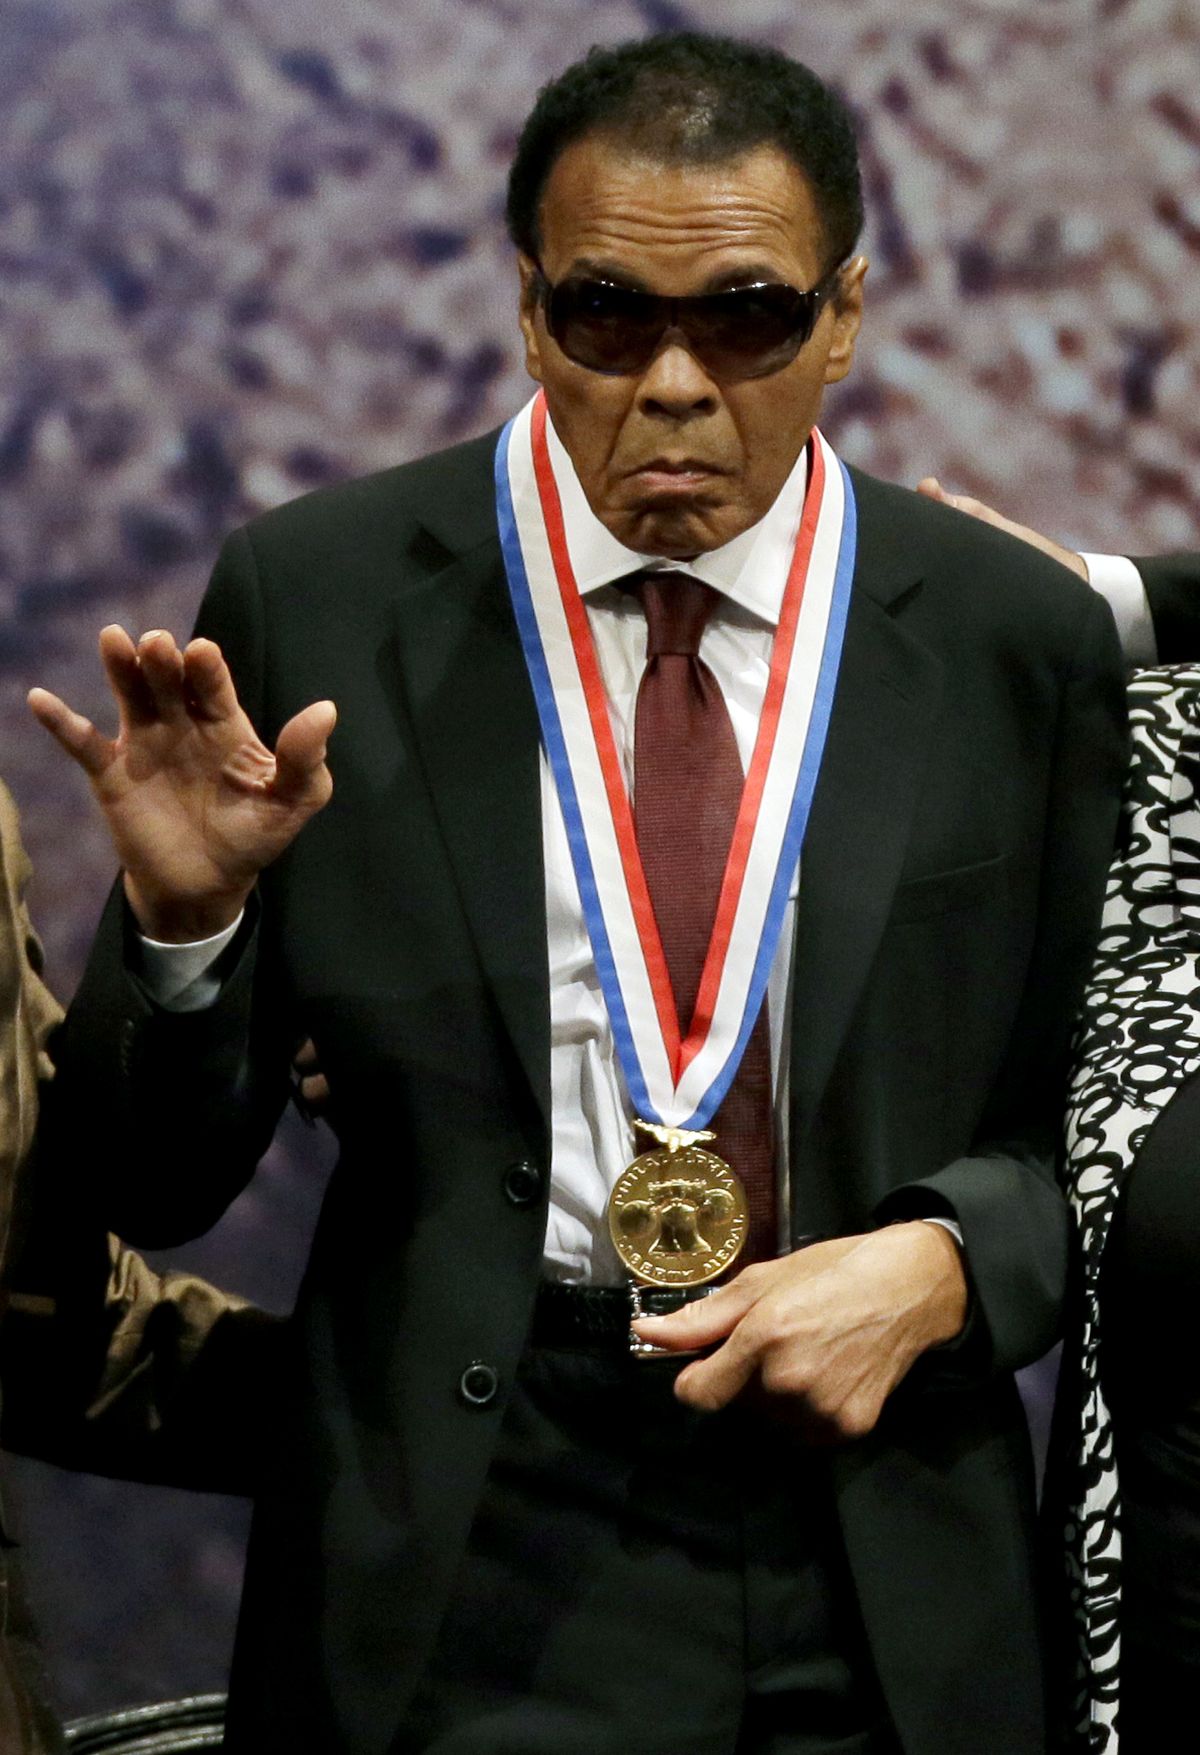 Retired boxing champion Muhammad Ali waves after receiving the Liberty Medal during a ceremony at the National Constitution Center, Thursday, Sept. 13, 2012, in Philadelphia. The honor is given annually to an individual who displays courage and conviction while striving to secure liberty for people worldwide. (Matt Slocum / Associated Press)